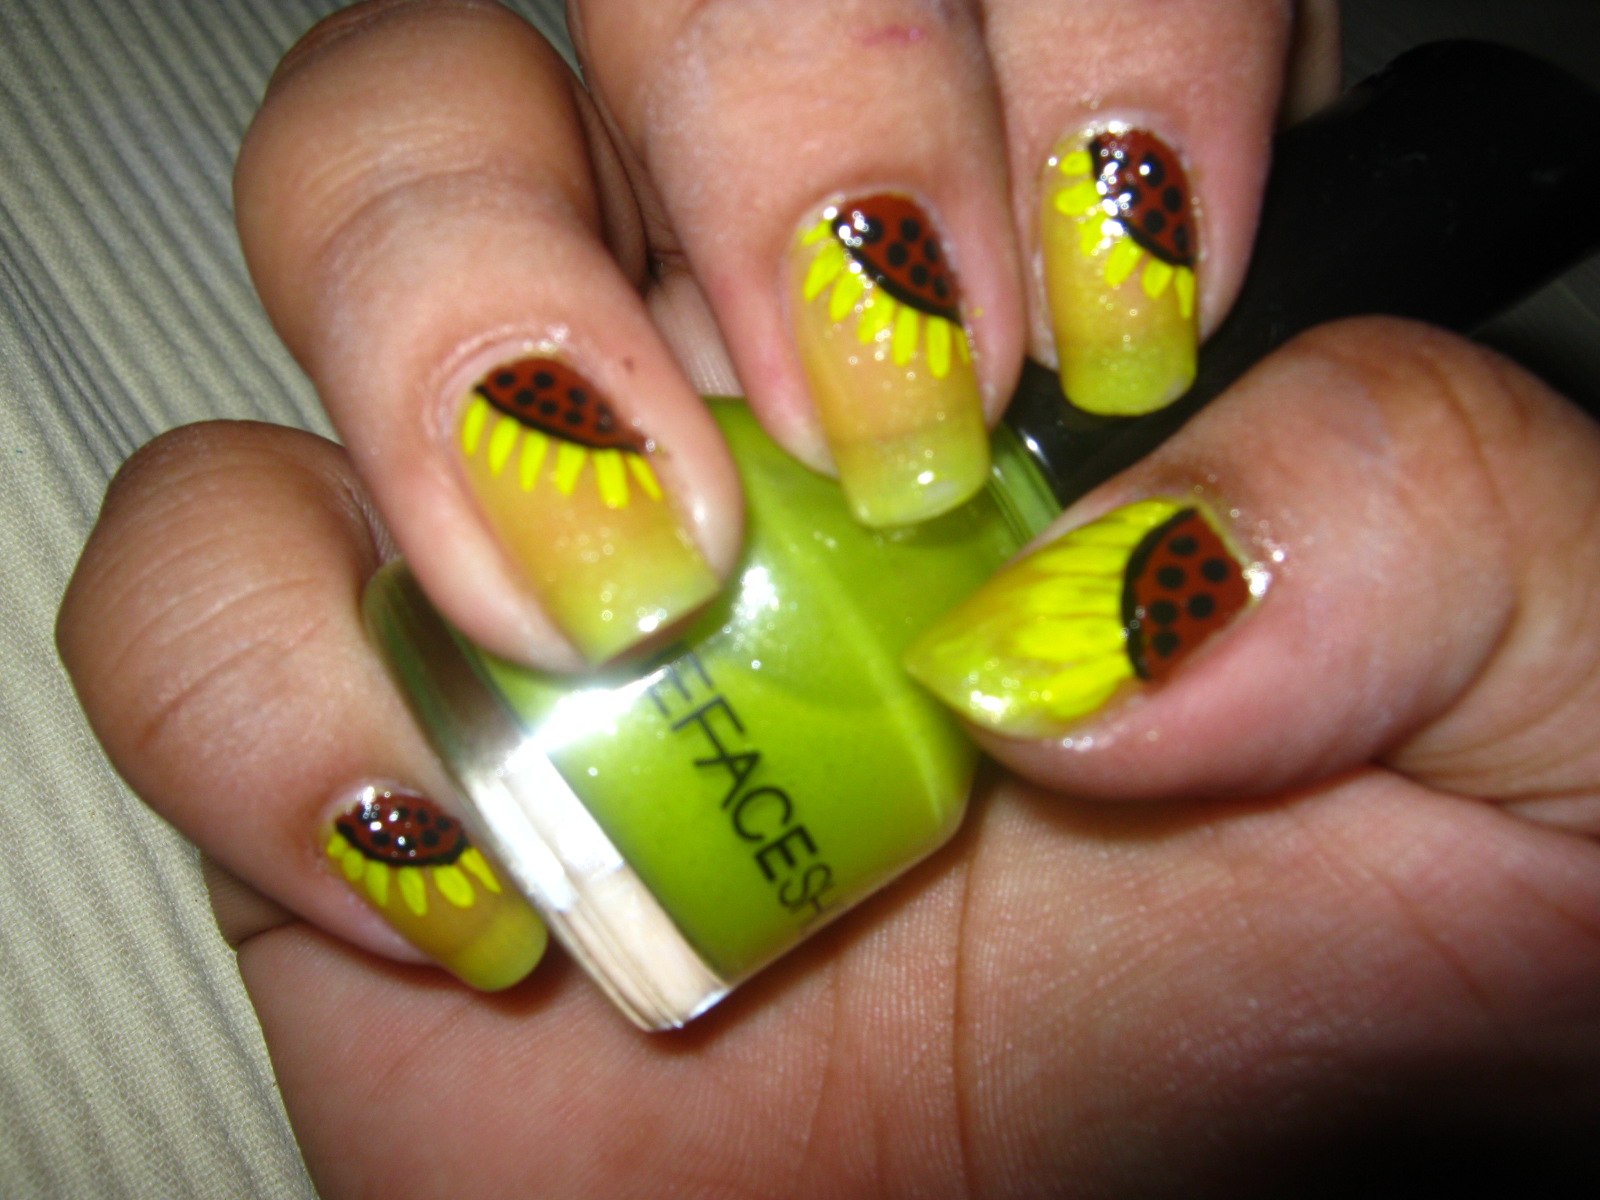 1. Sunflower Nail Art Designs for a Bright and Sunny Look - wide 8